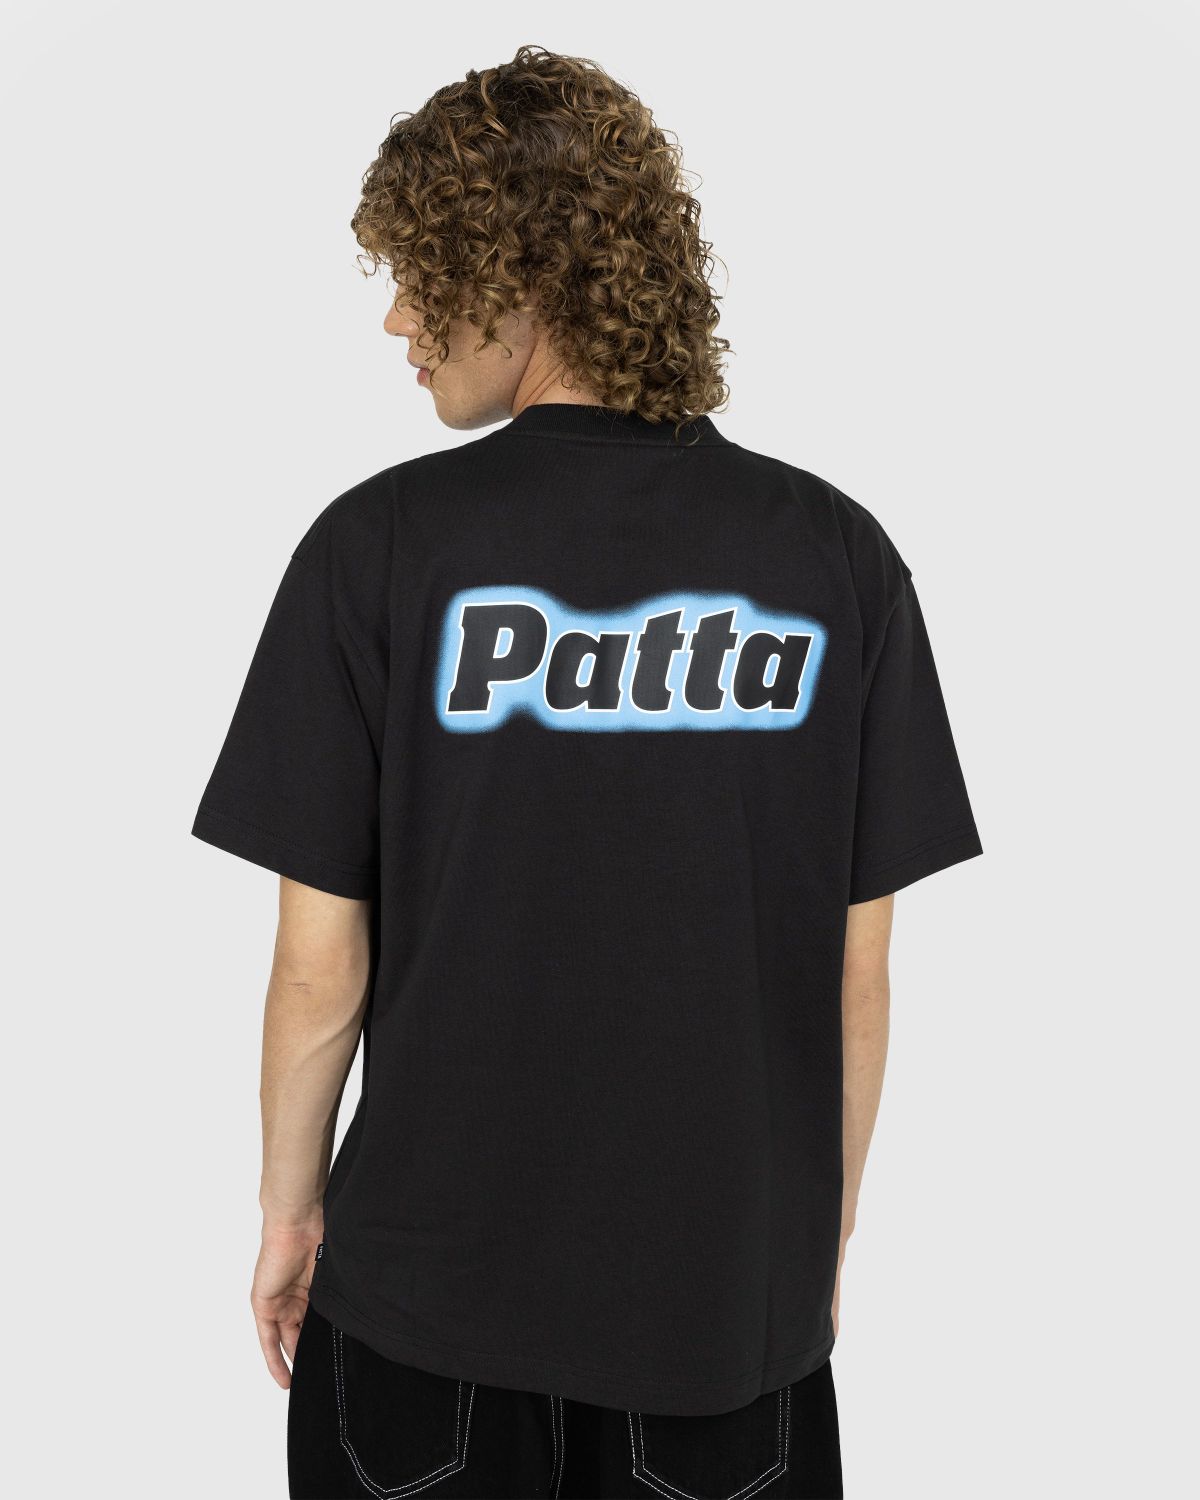 Patta – It Does Matter What You Think T-Shirt Black - Tops - Black - Image 3